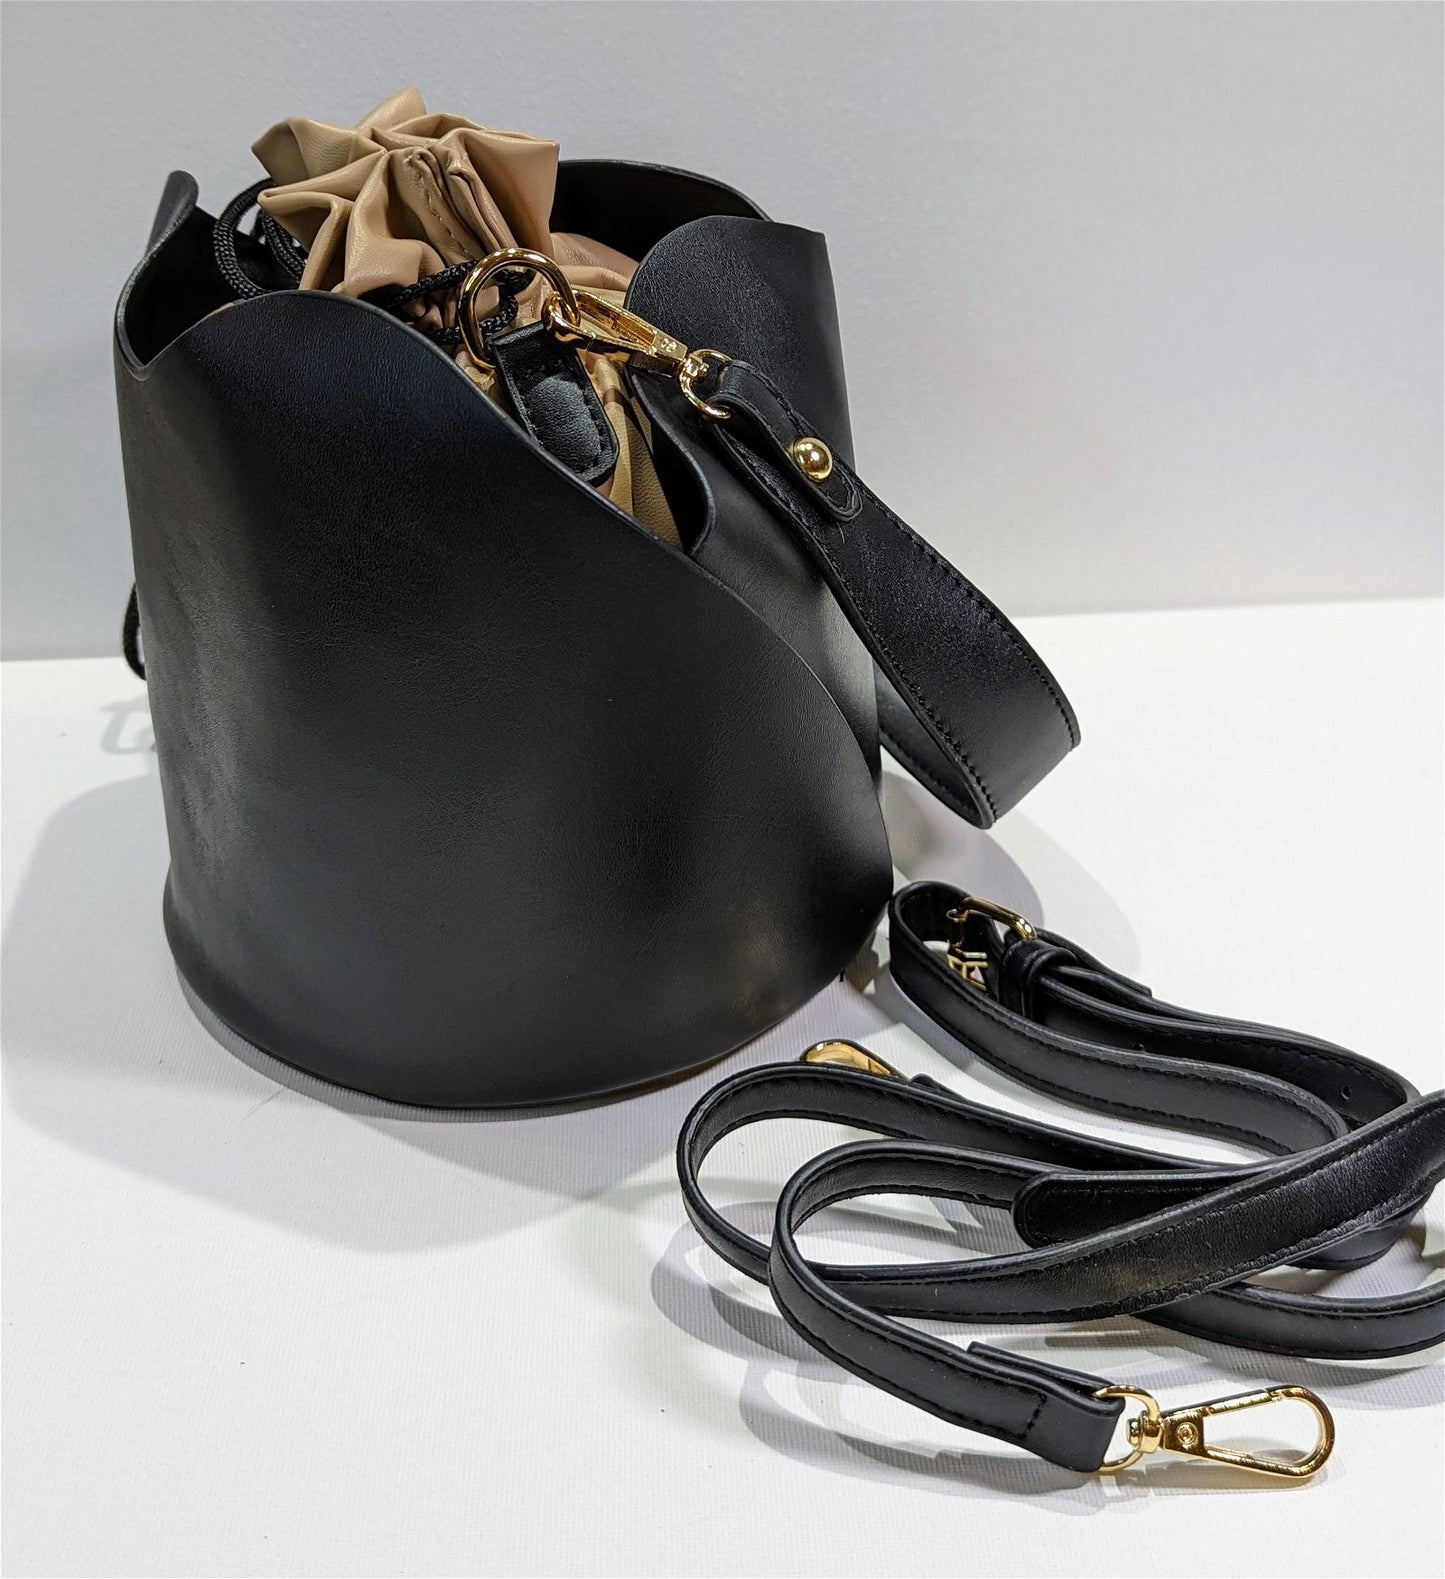 The bucket Bag - Maily's Classic Accessories